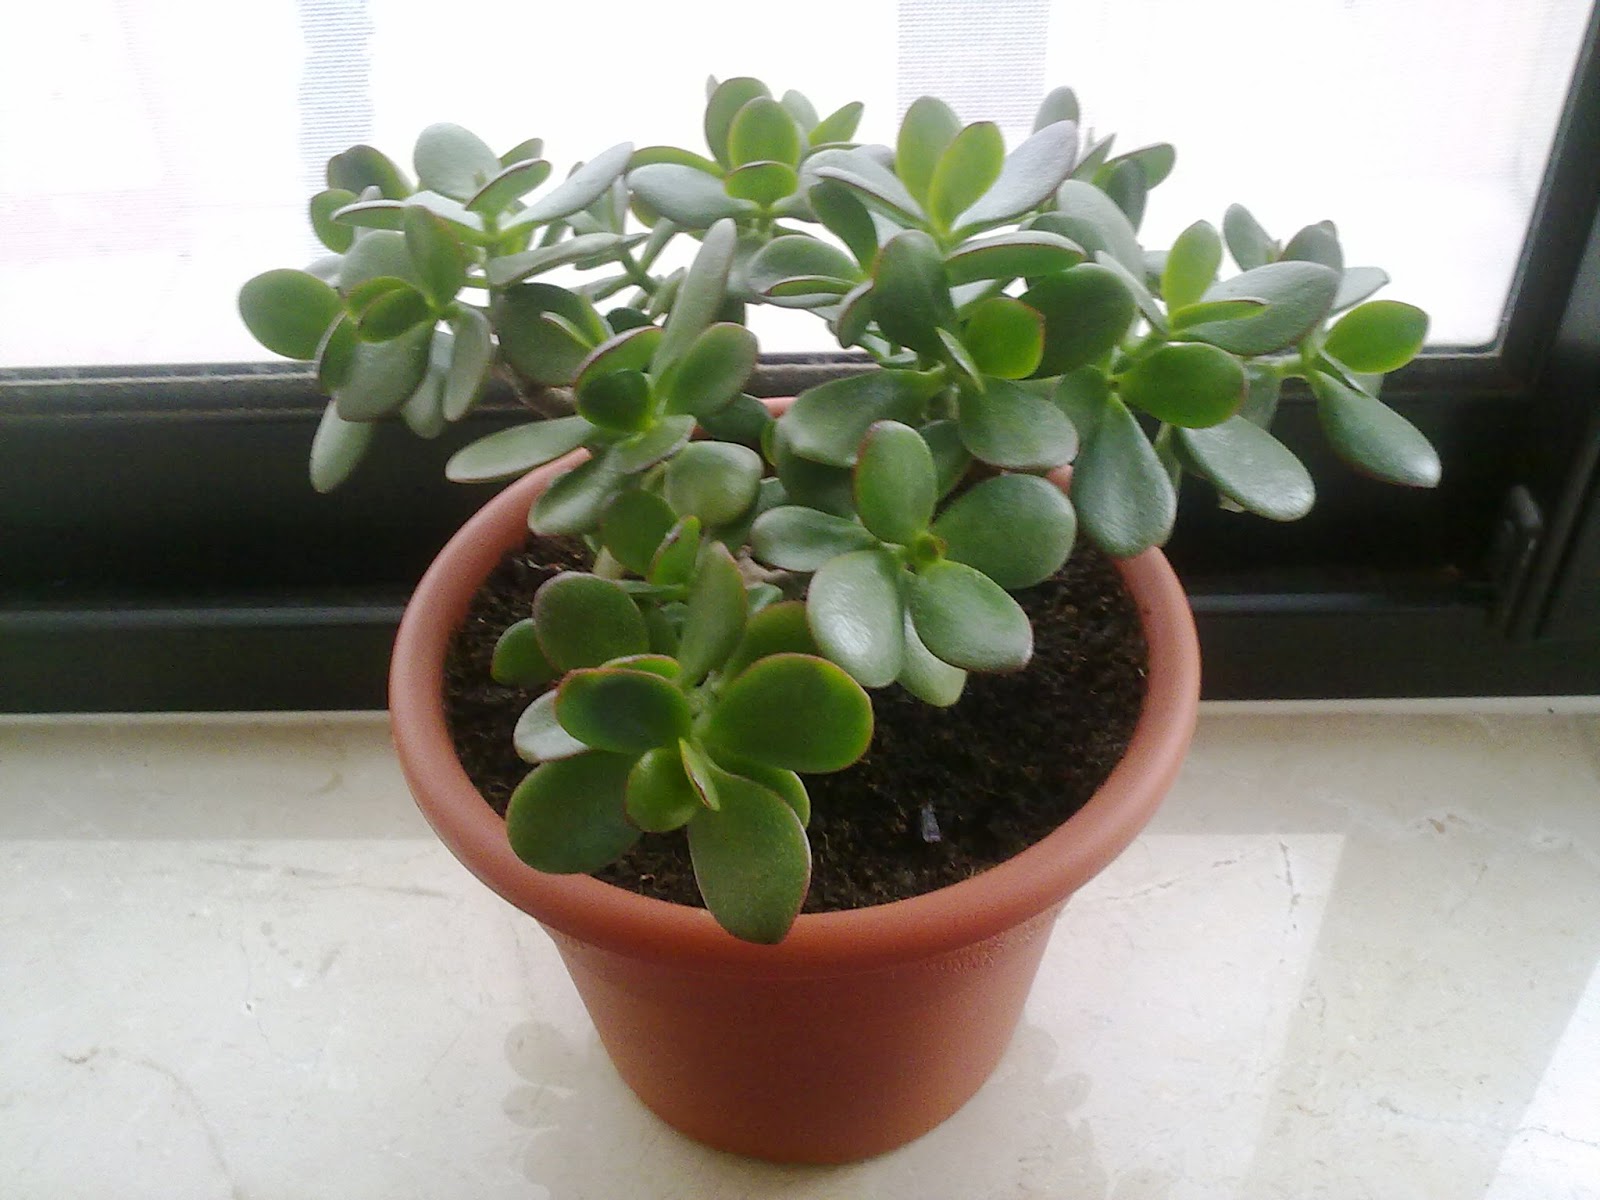 jade plant plants house indoors greenery bring great indoor care flowers pot green grow its gets houseplants good